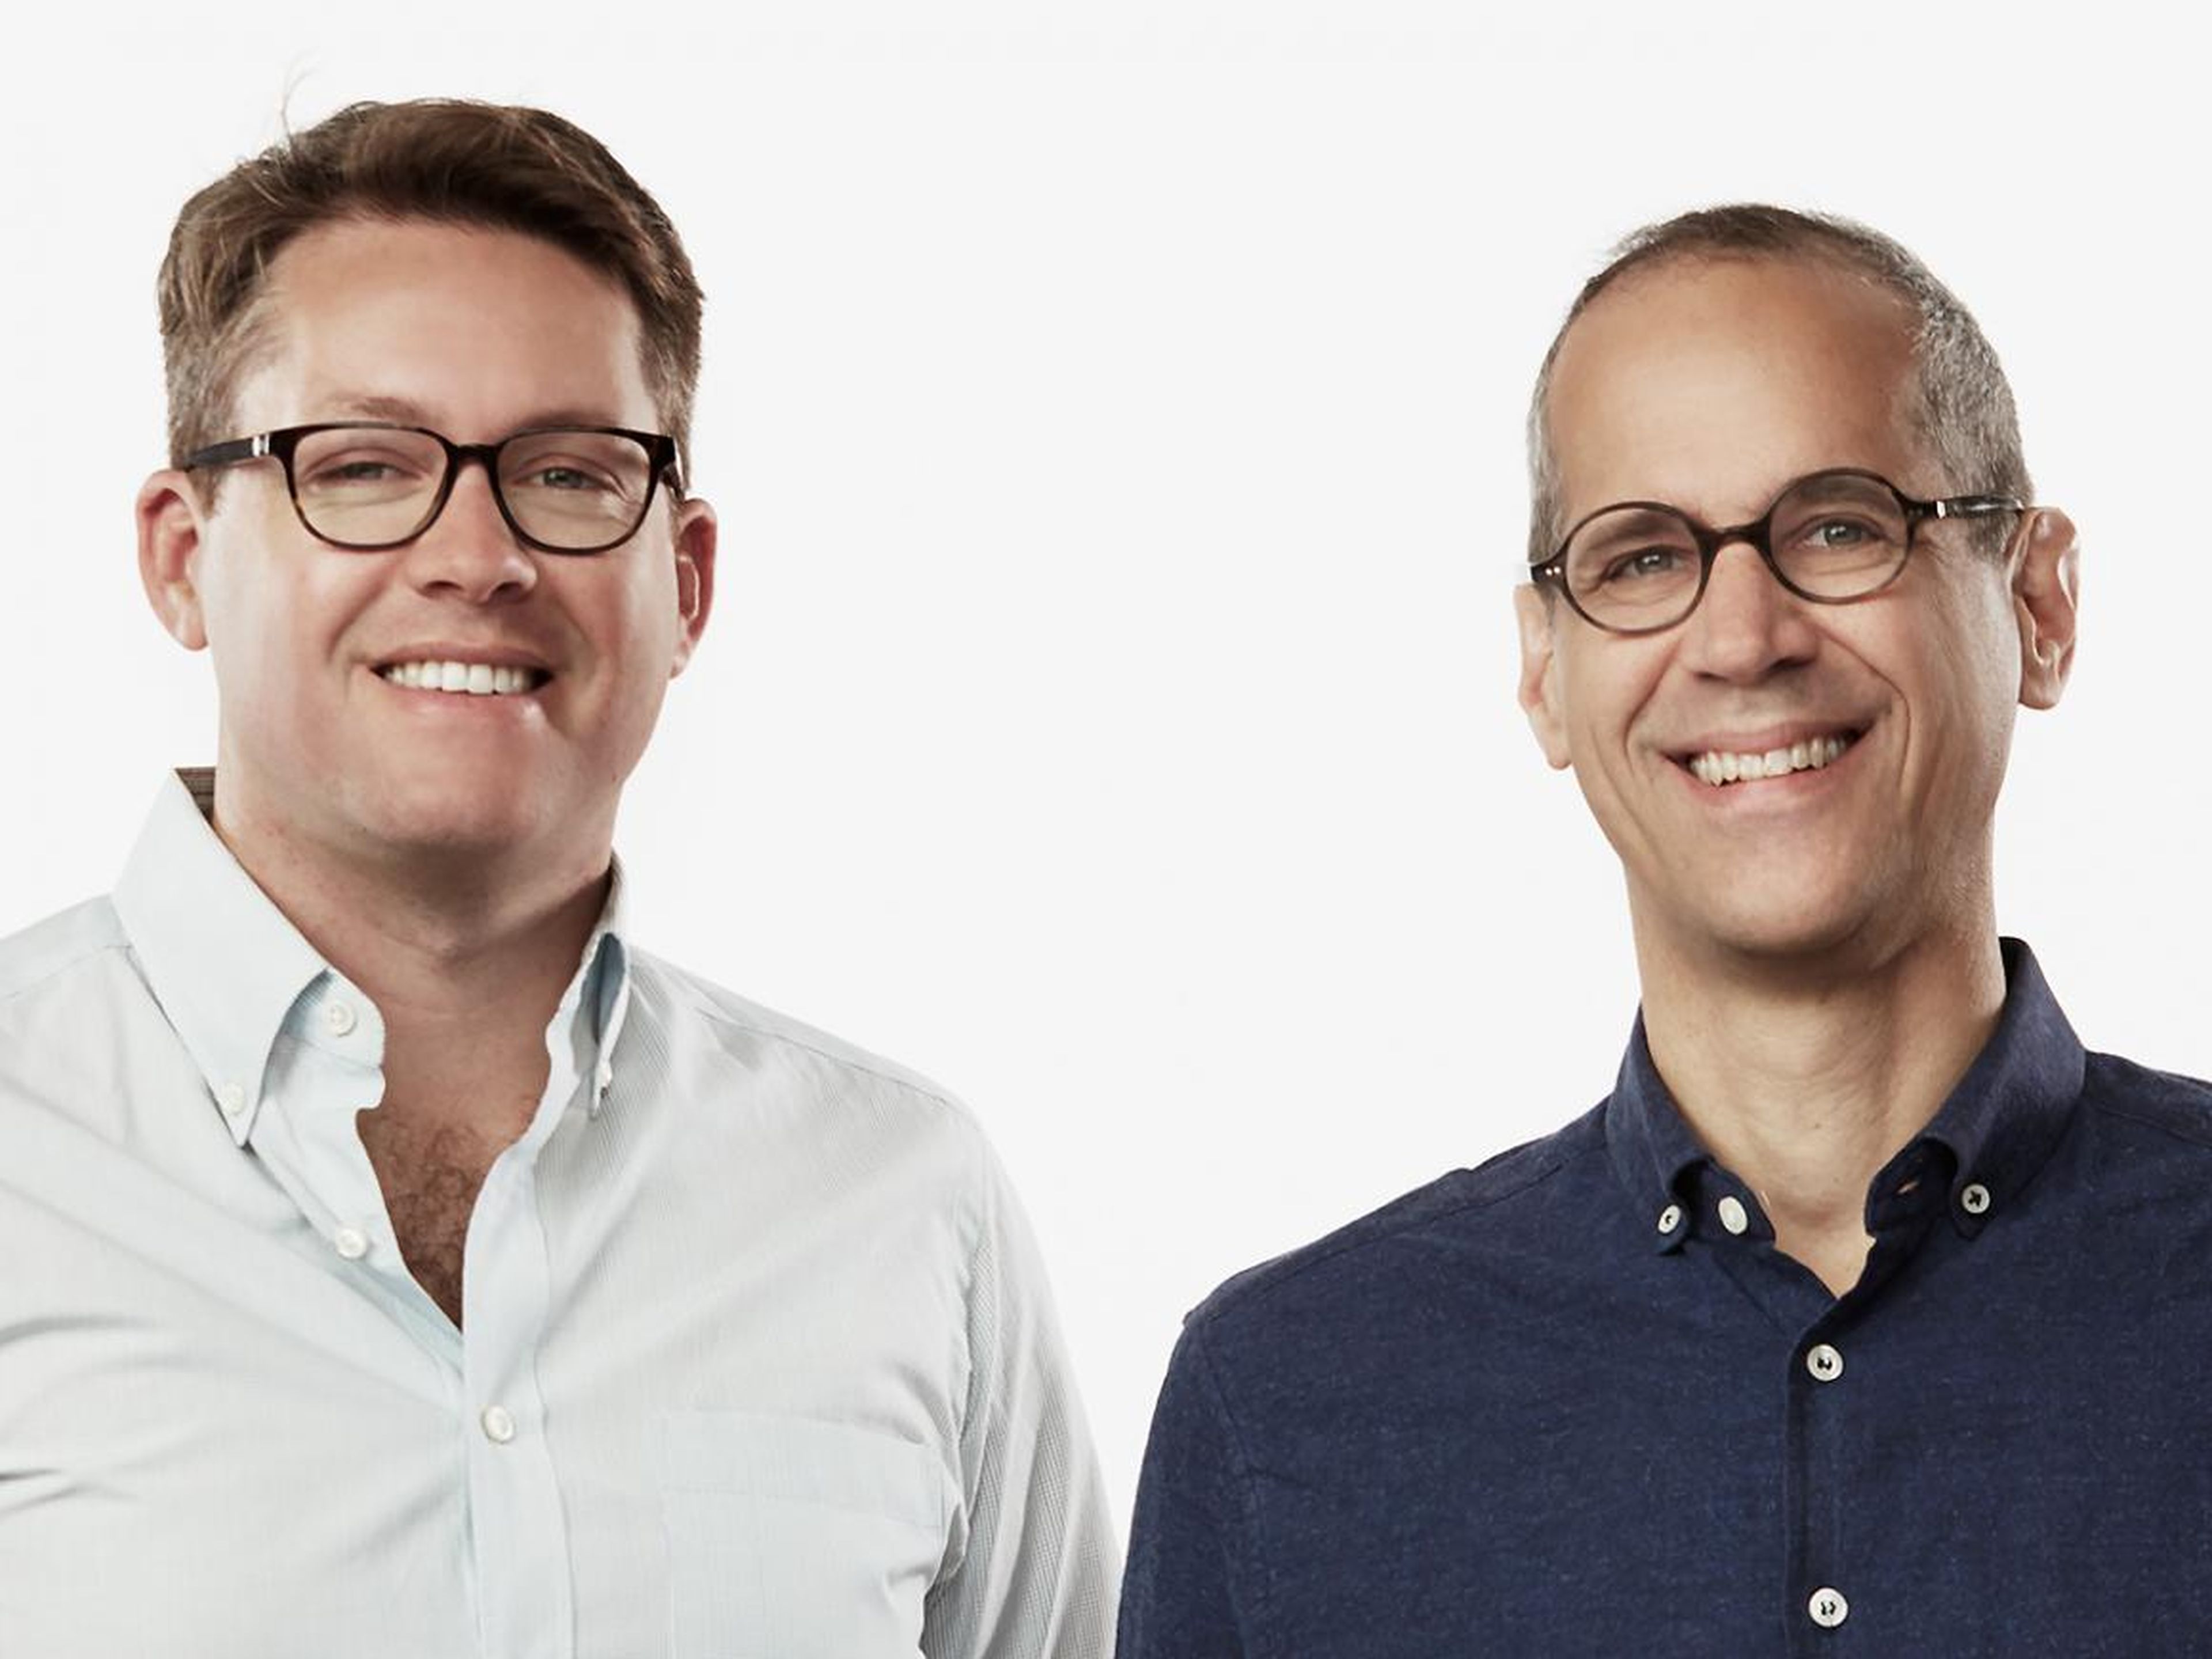 Alex Blumberg and Matthew Lieber, the founders of Gimlet Media, are spearheading a podcast boom